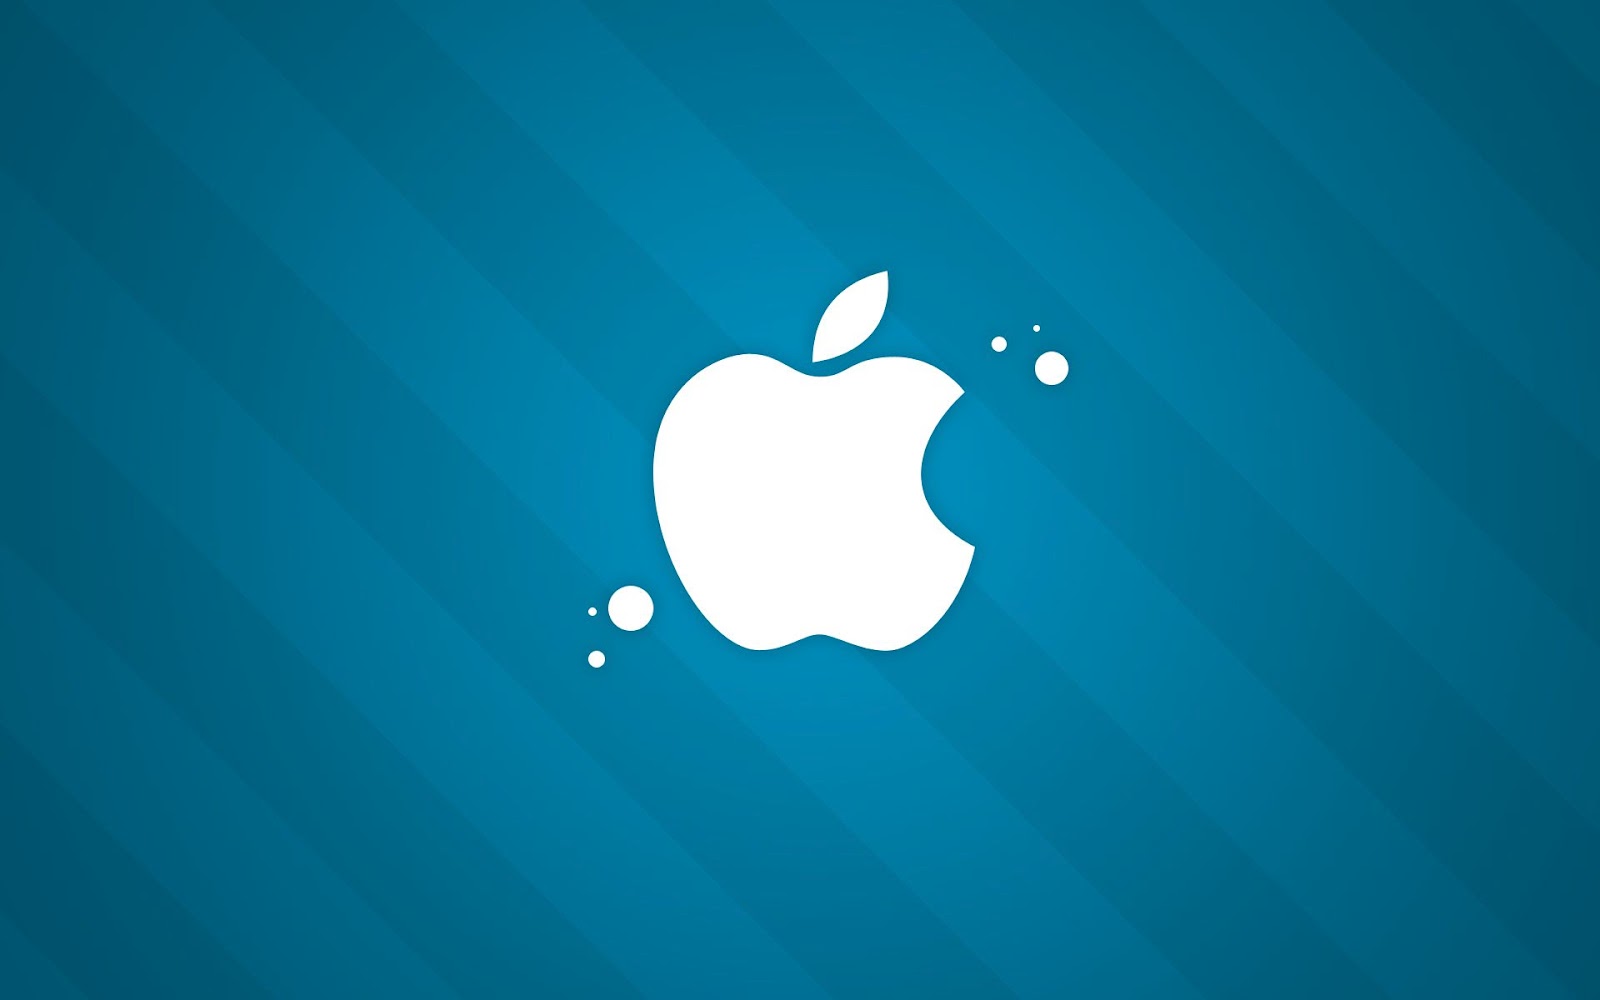  apple mobile wallpapers apple iphone wallpapers download apple 1600x1000